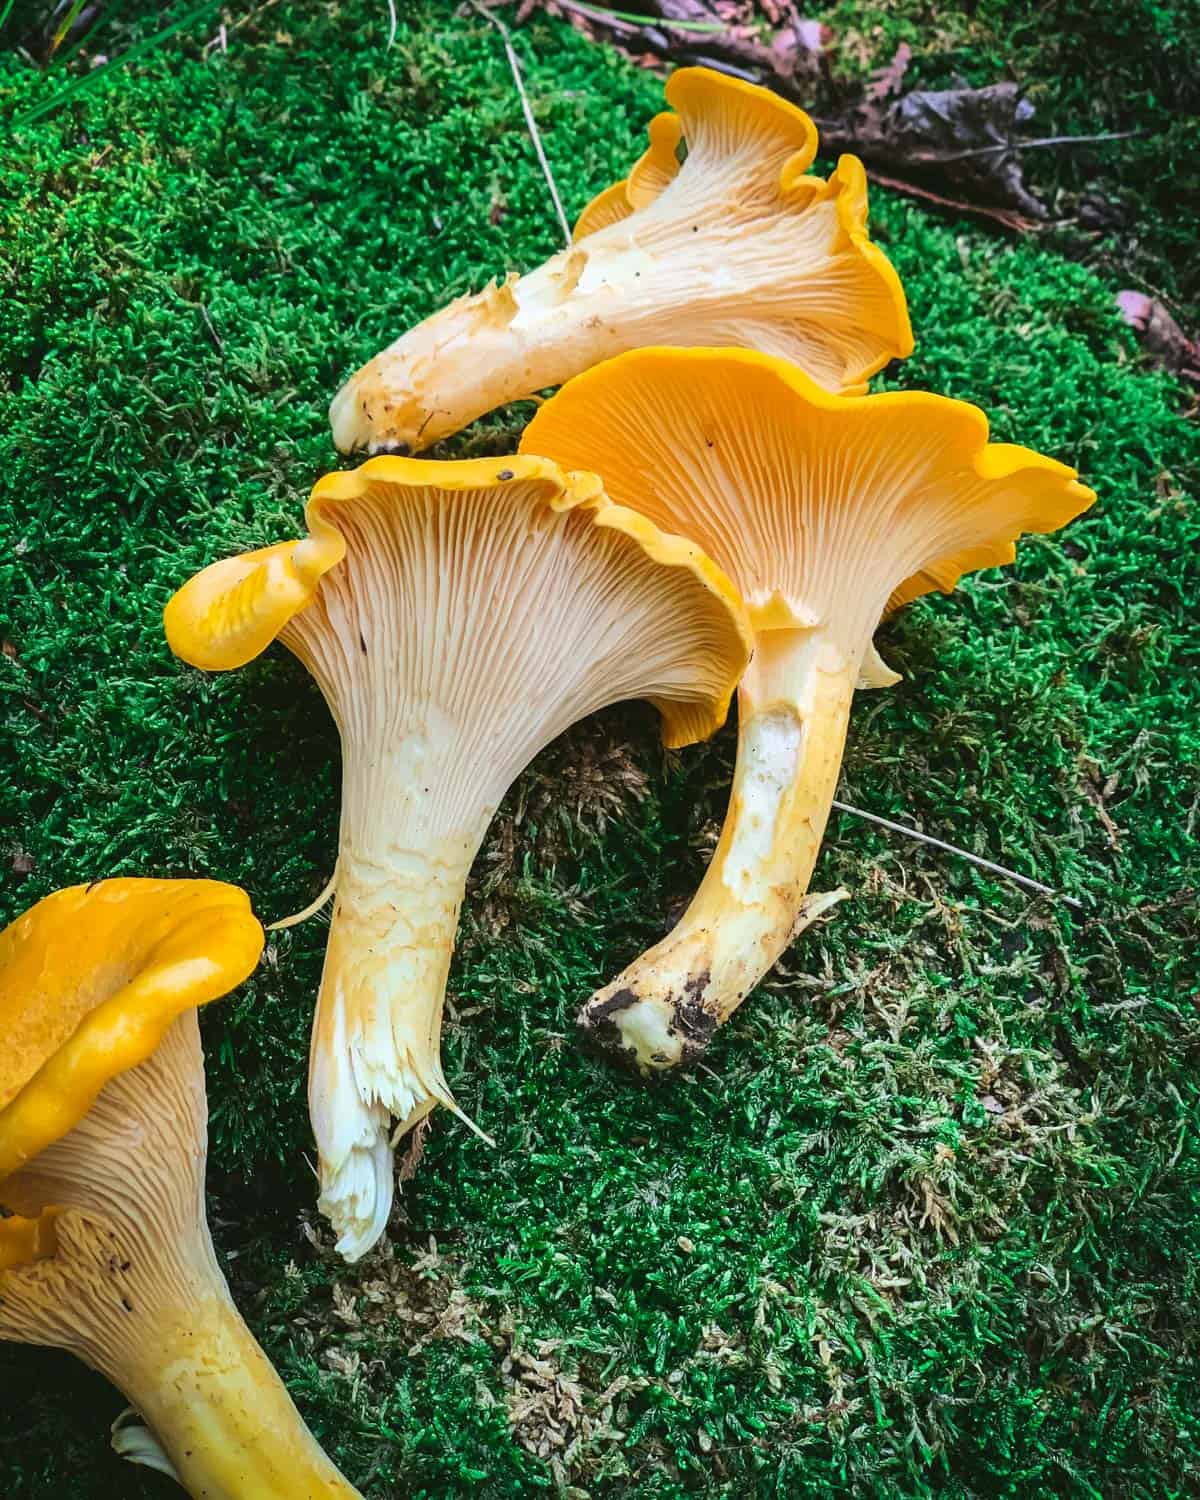 Where do mushrooms come from? This is the secret life of fungi